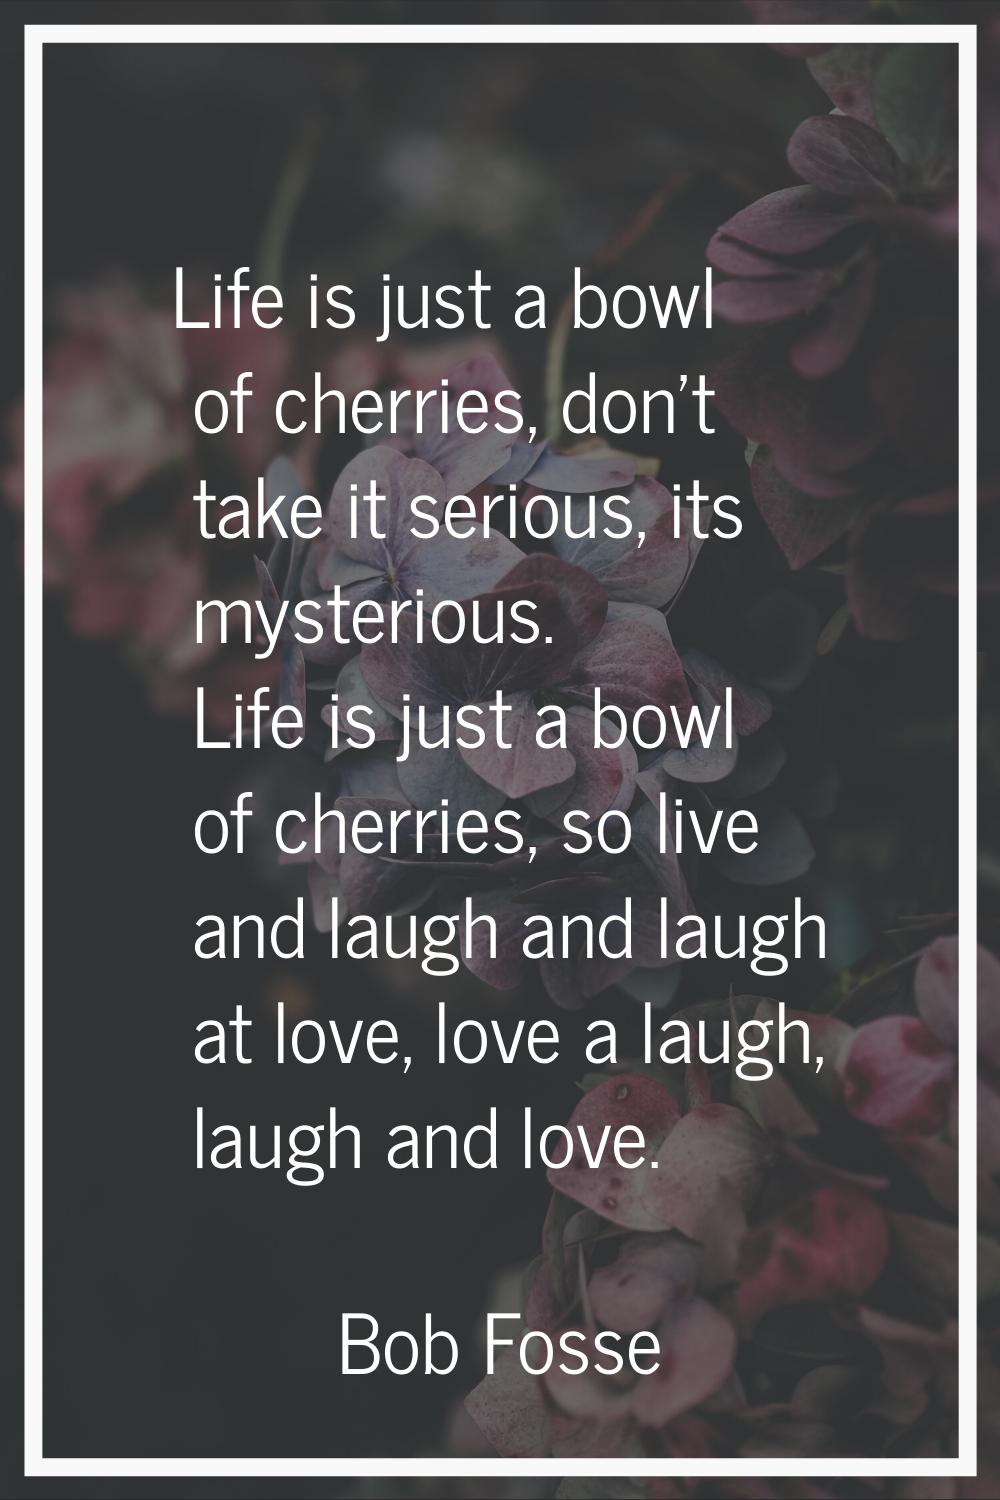 Life is just a bowl of cherries, don't take it serious, its mysterious. Life is just a bowl of cher